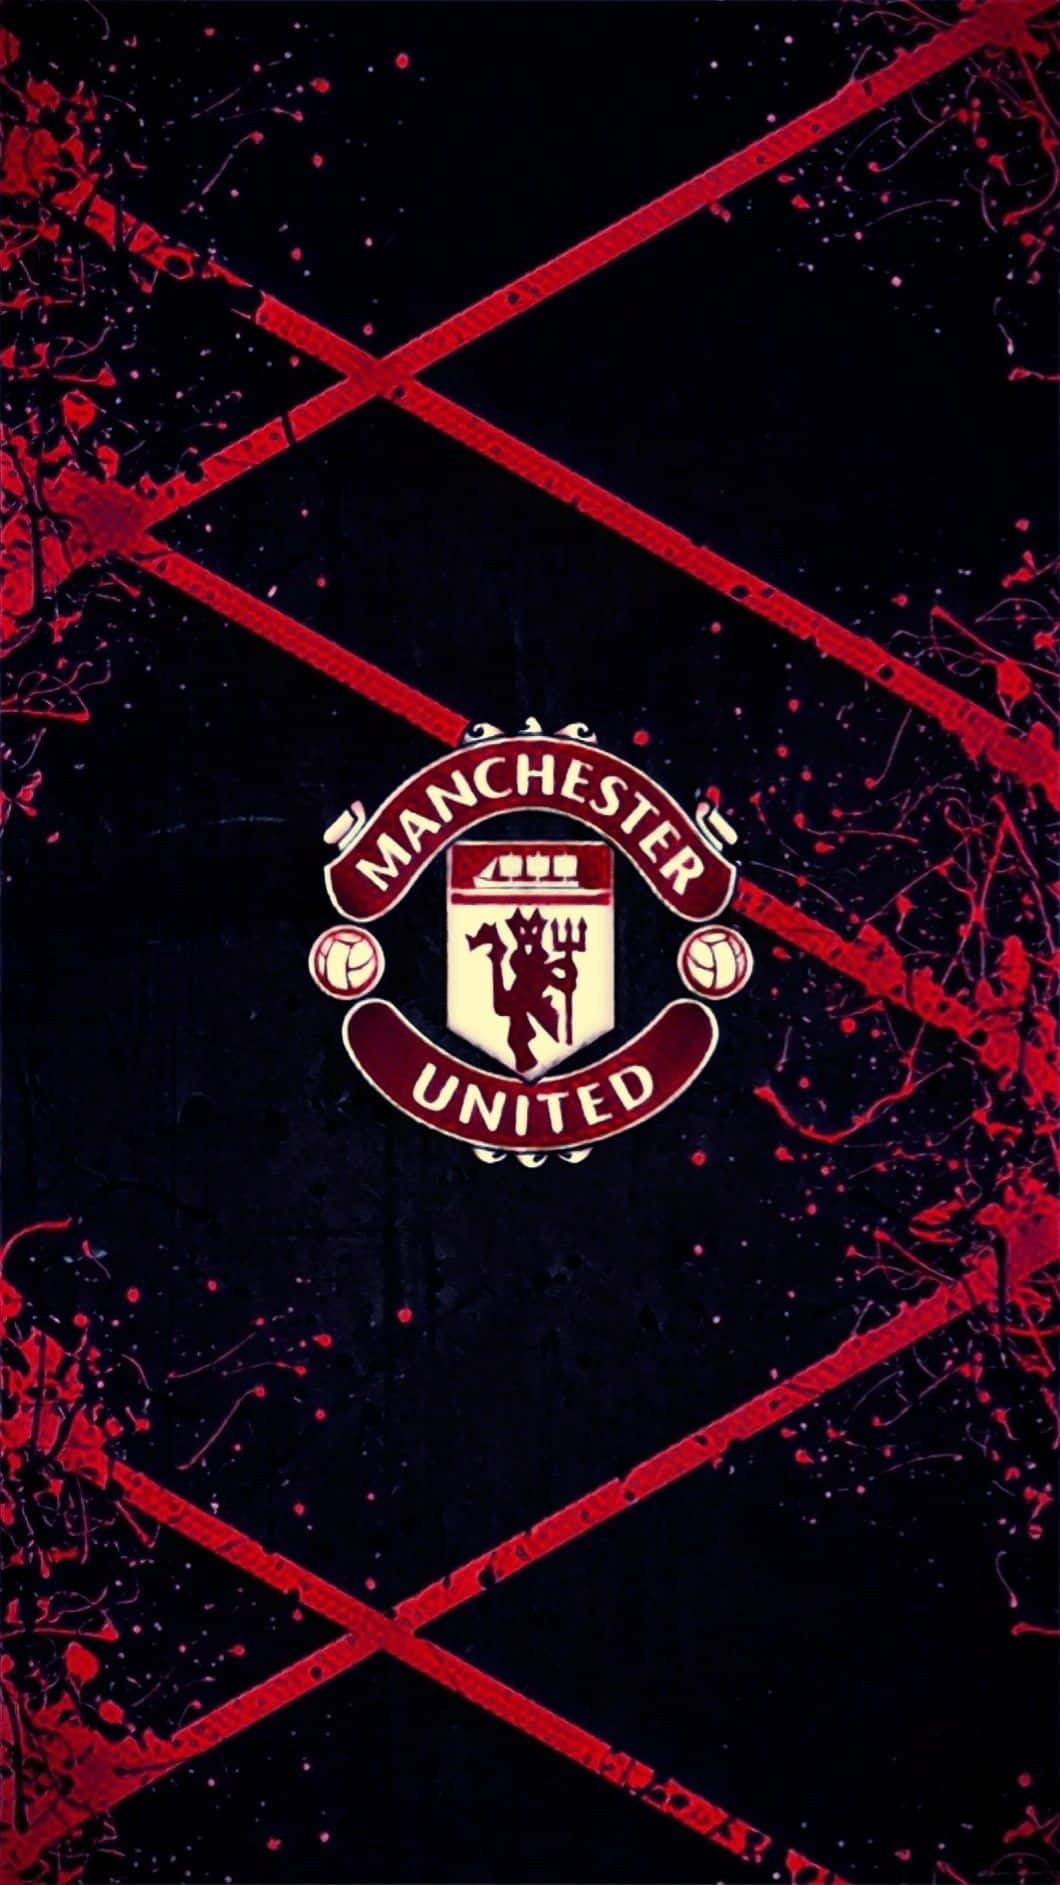 Brighten Your Day With Manchester United Football Club Spirit On Your Iphone Wallpaper